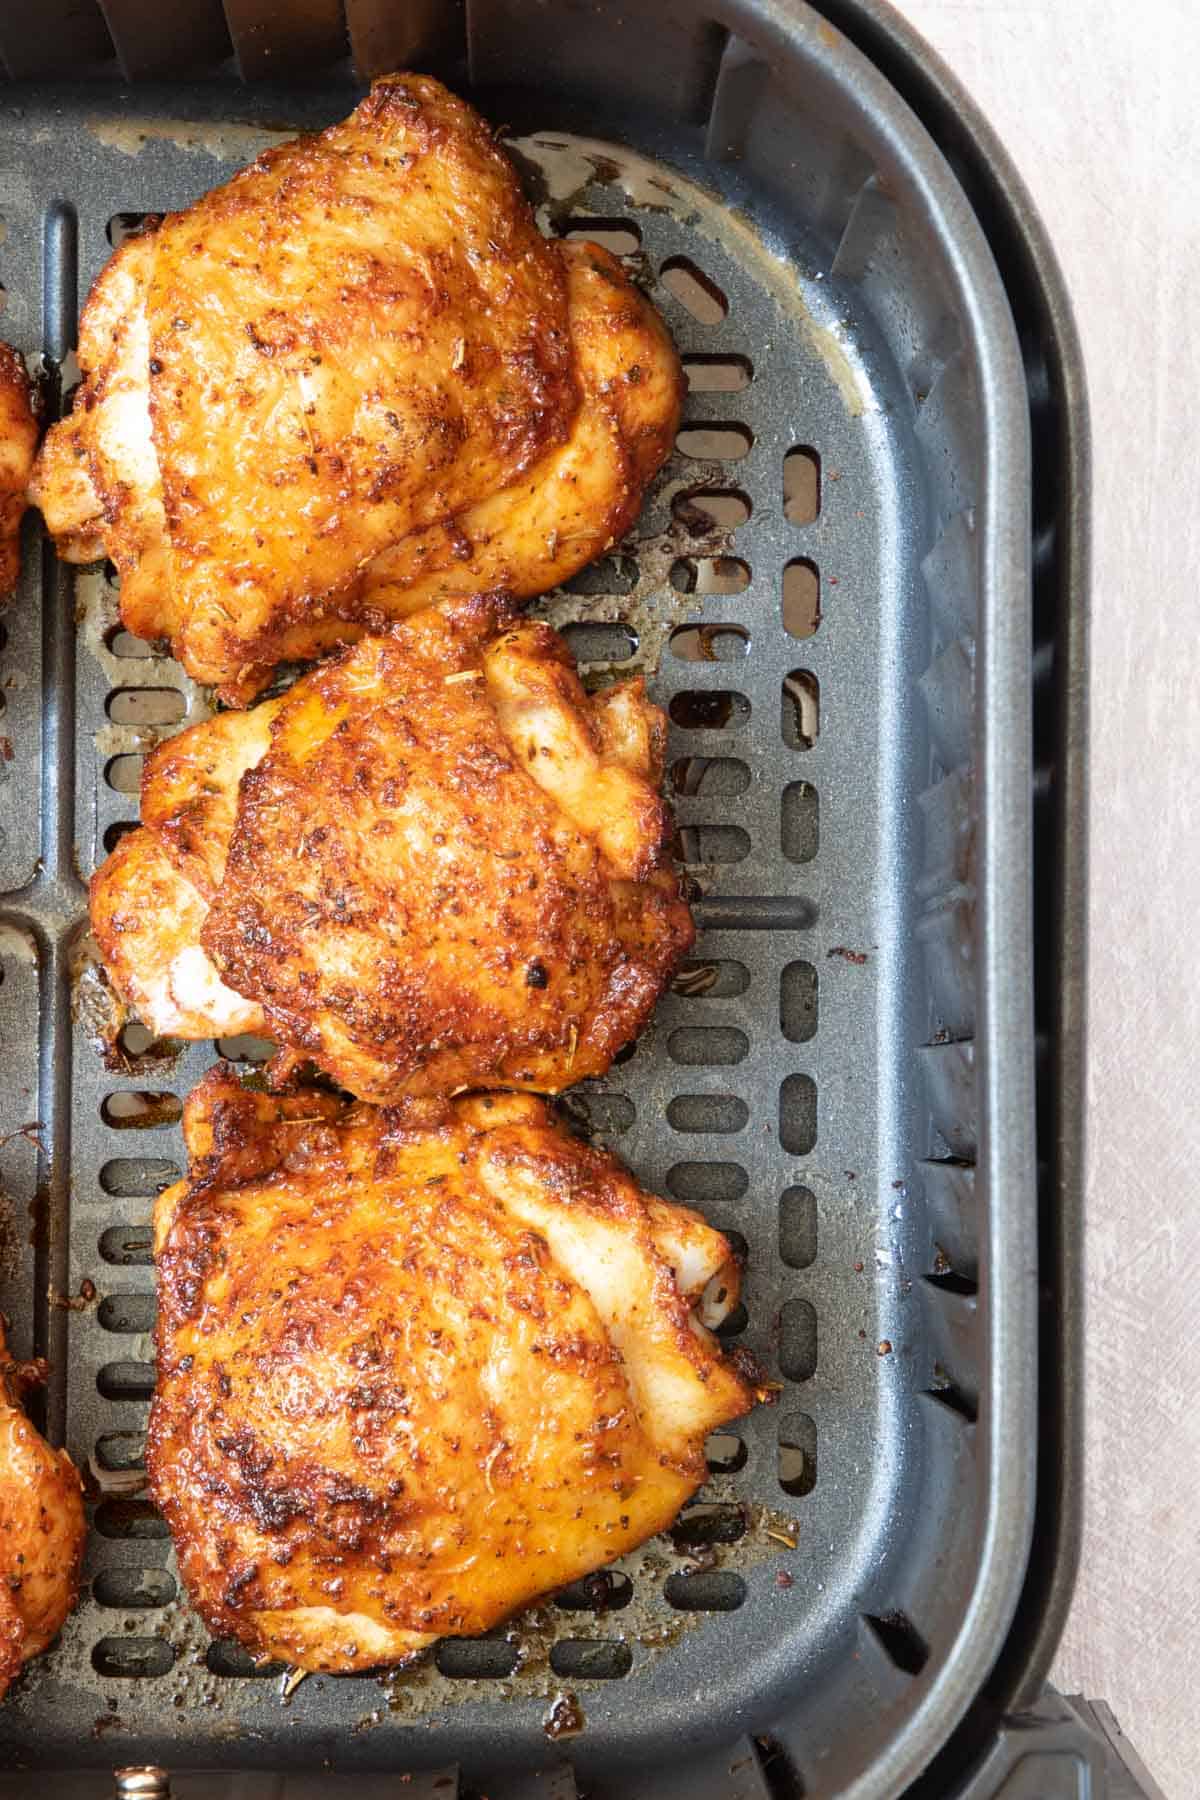 the completed air fryer chicken thighs inside the air fryer basket and ready to serve